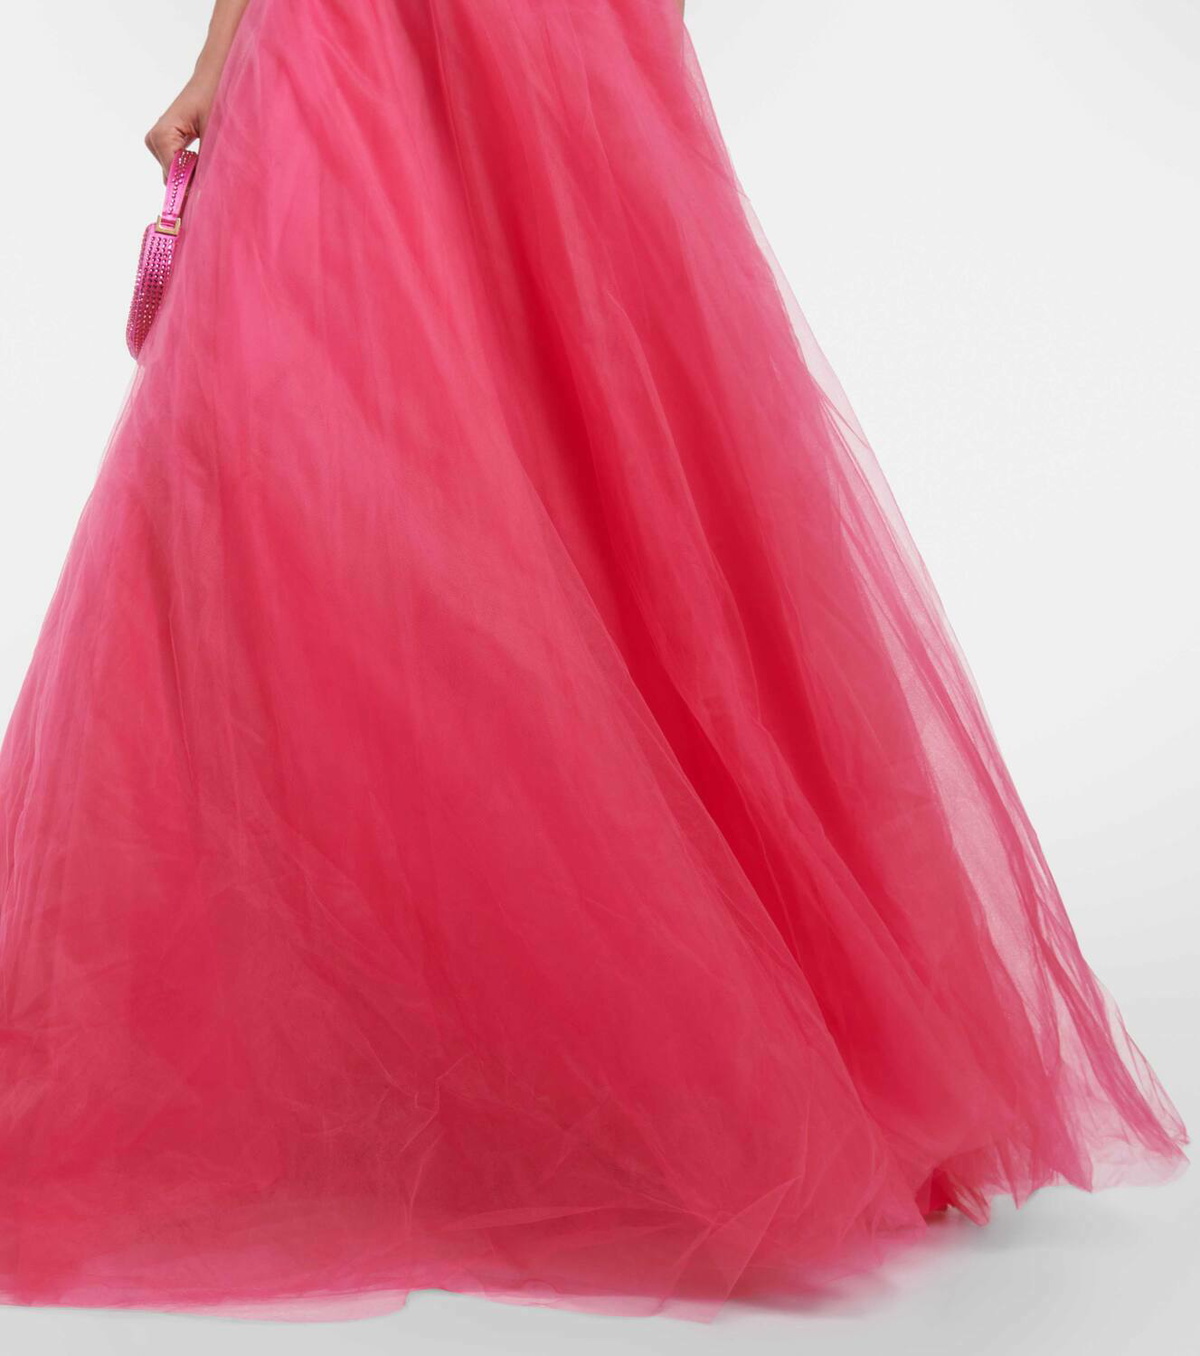 Costarellos Floral-embroidered Tulle Gown in Pink